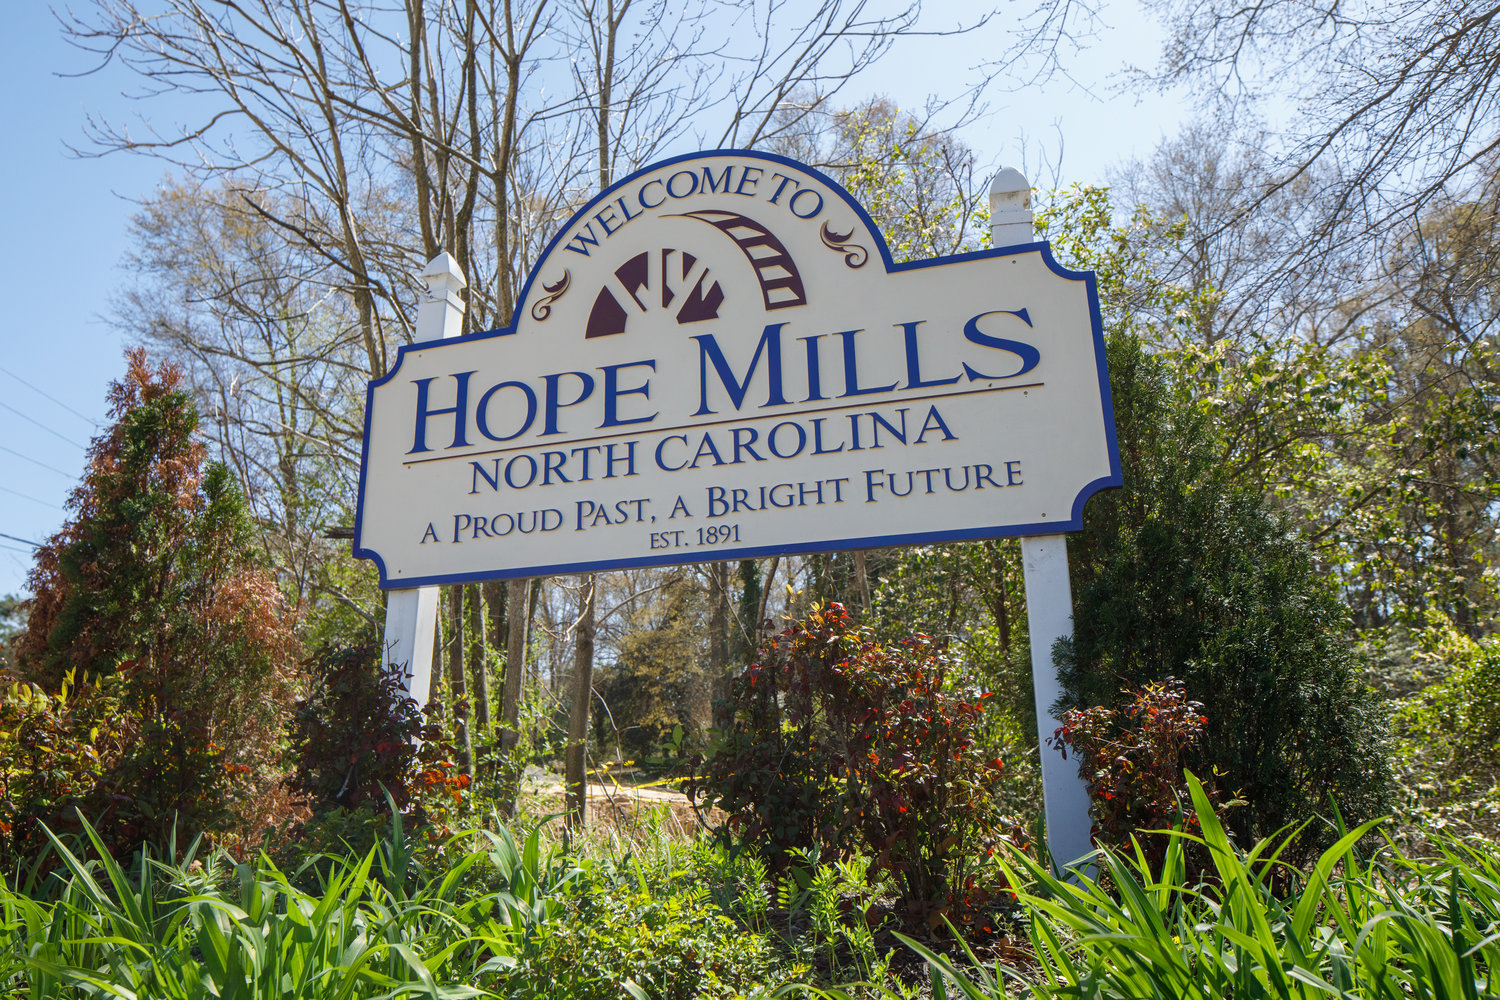 The Hope Mills Board of Commissioners voted during a special meeting Monday to make Juneteenth a paid holiday for the town.